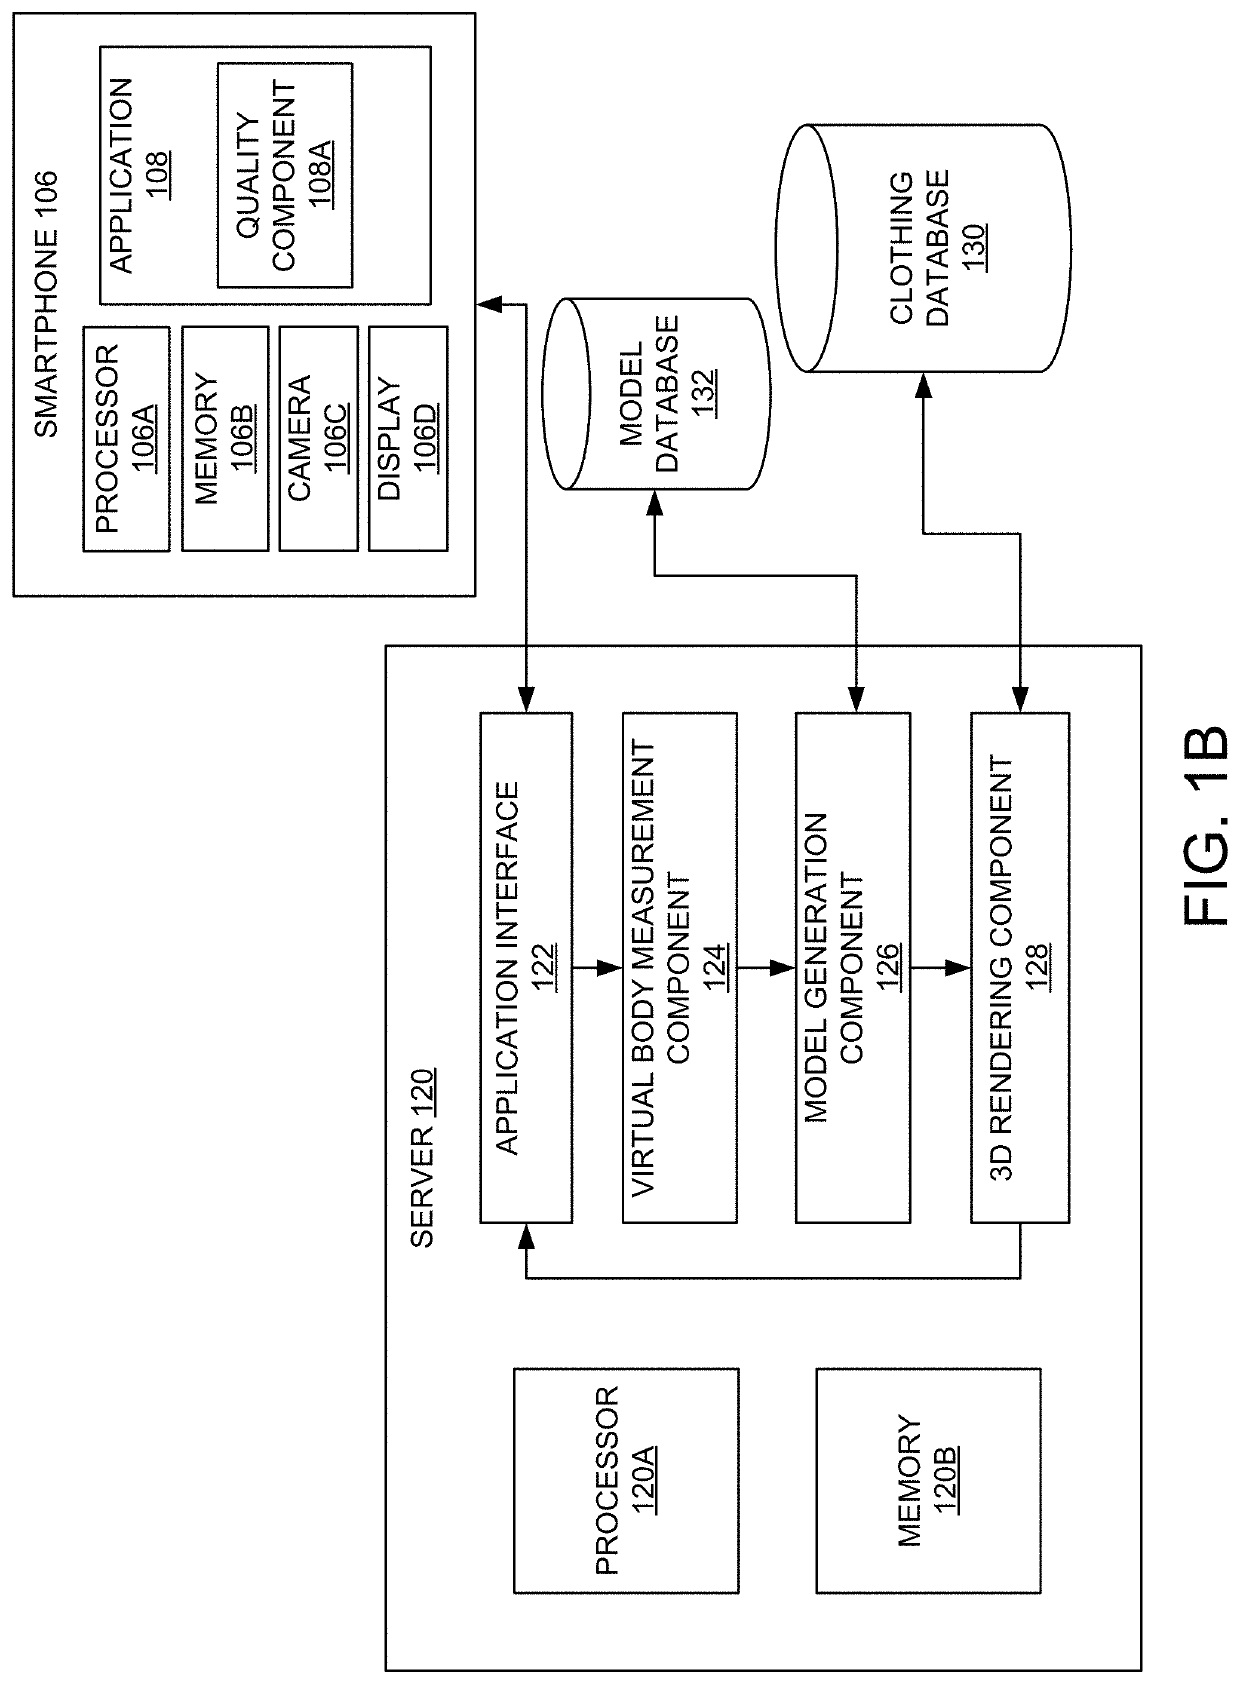 Systems and methods for virtual body measurements and modeling apparel